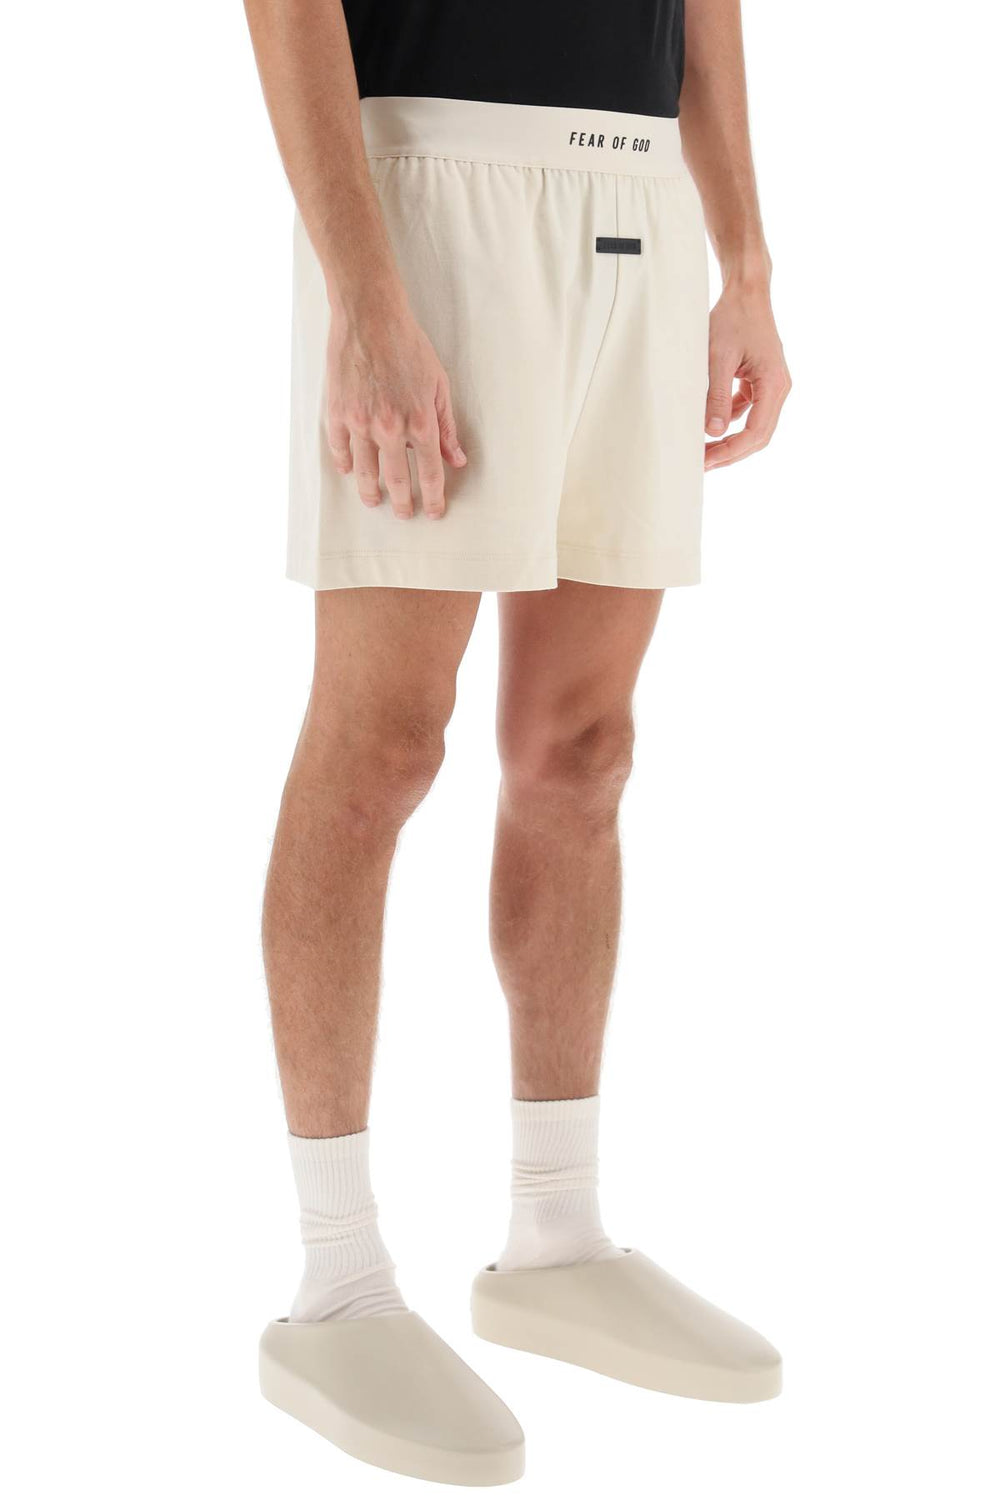 Fear of god the lounge boxer short-1